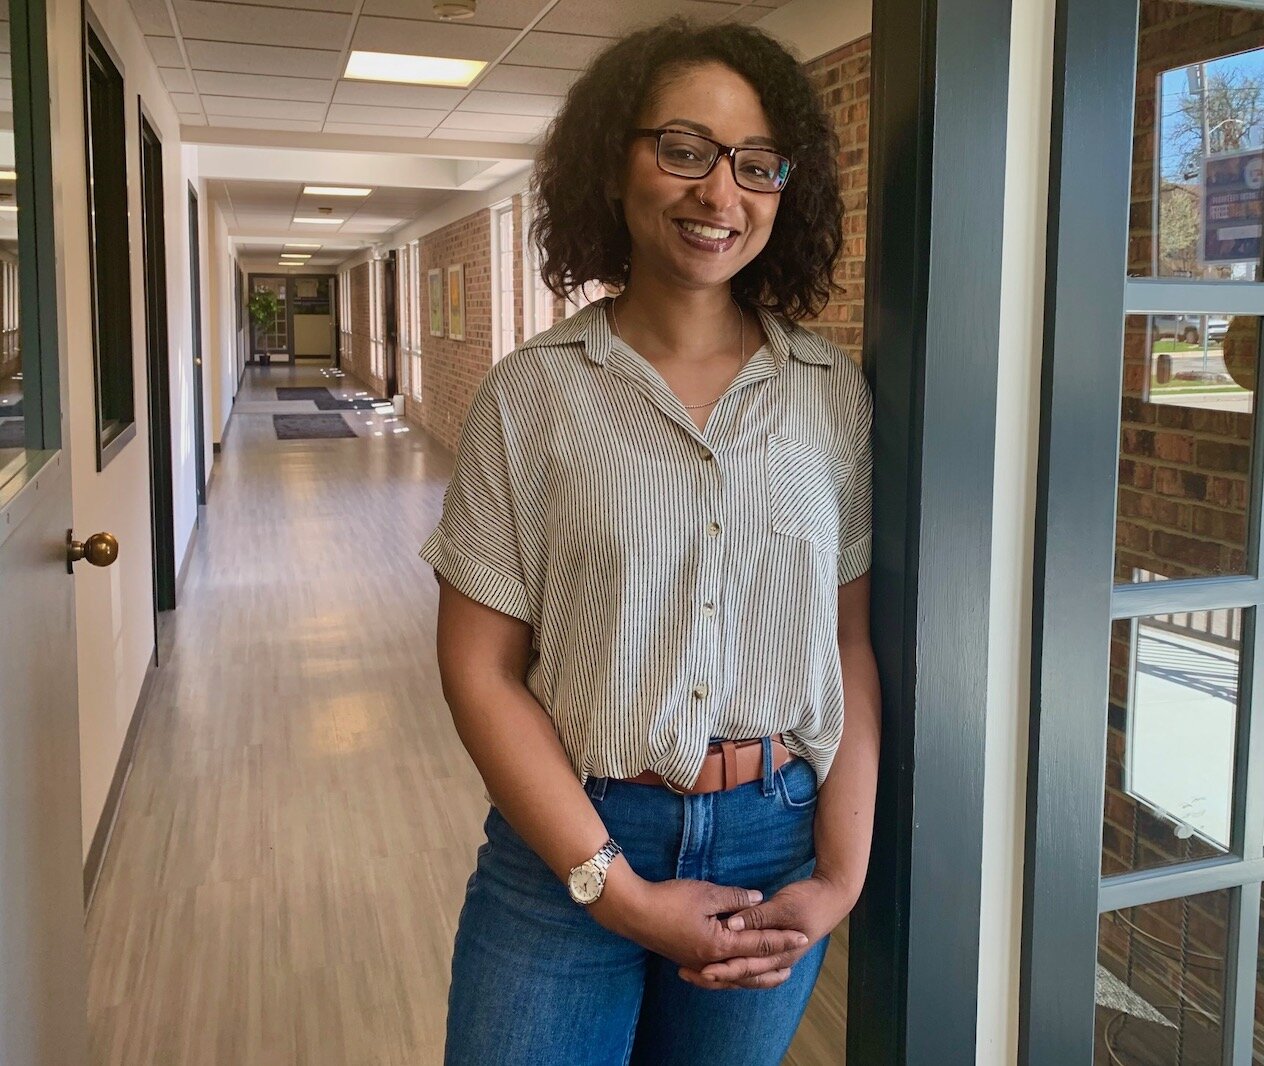 Helping people remove barriers to quality housing has long been a focus of Patrese Griffin, director of the Kalamazoo County Continuum of Care.